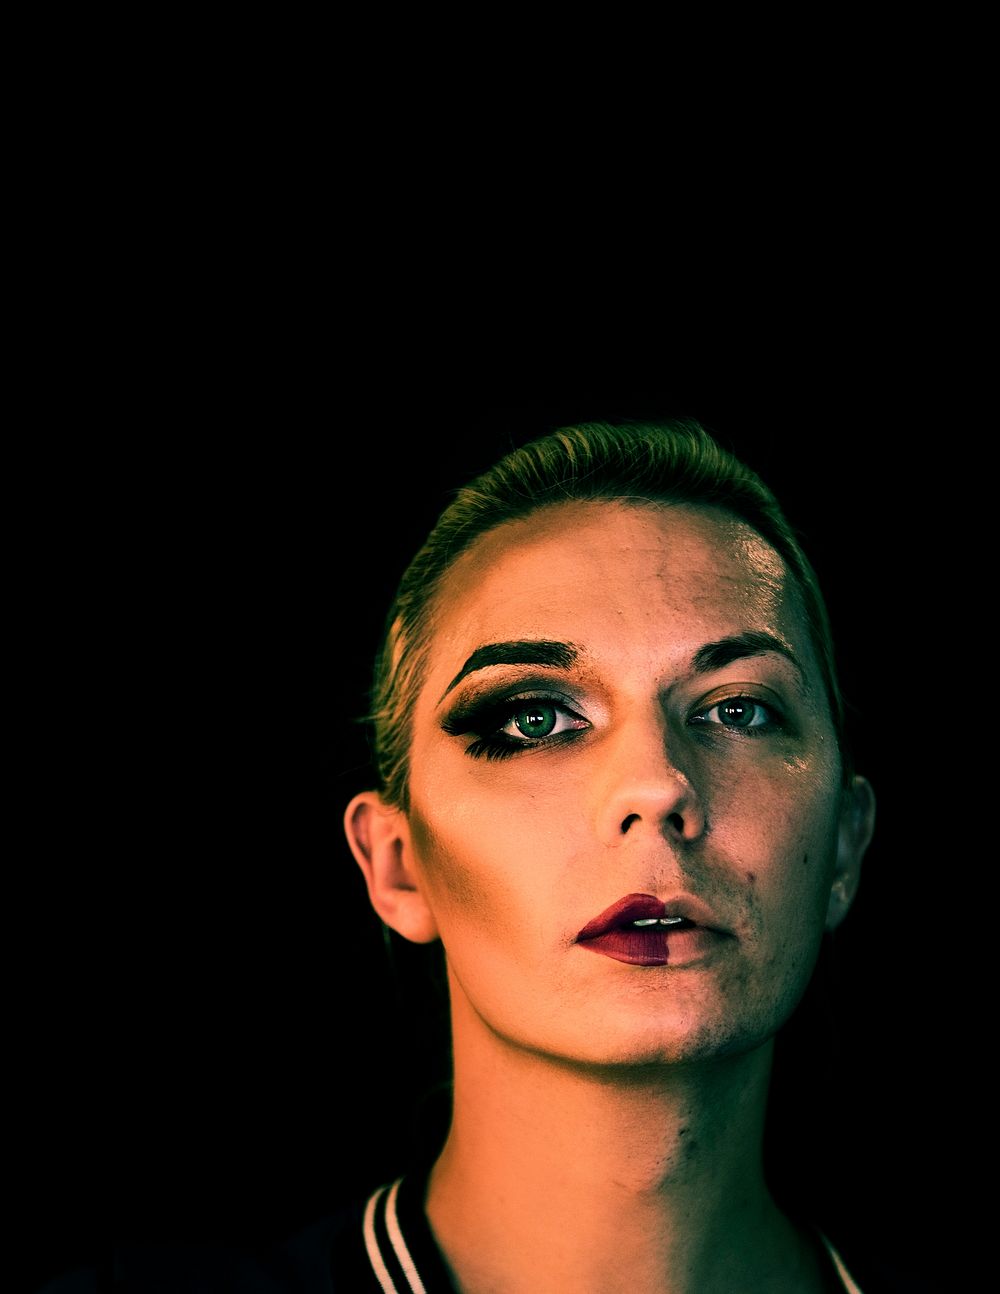 Portrait of a transgender woman with half a makeup on the face